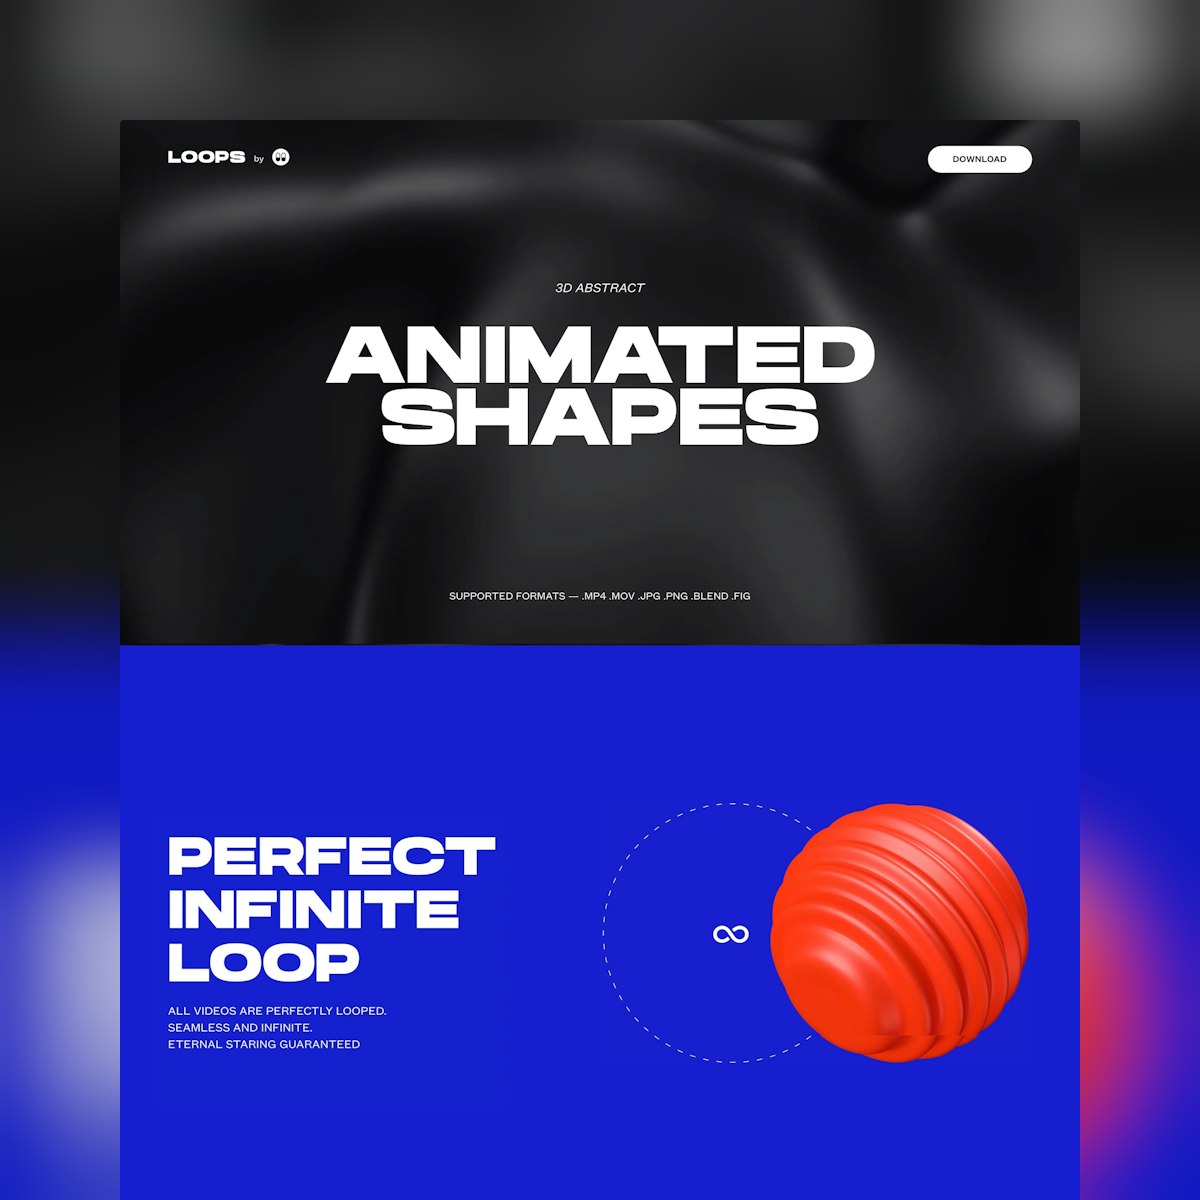 Product Page screen design idea #427: Website Inspiration: Loops